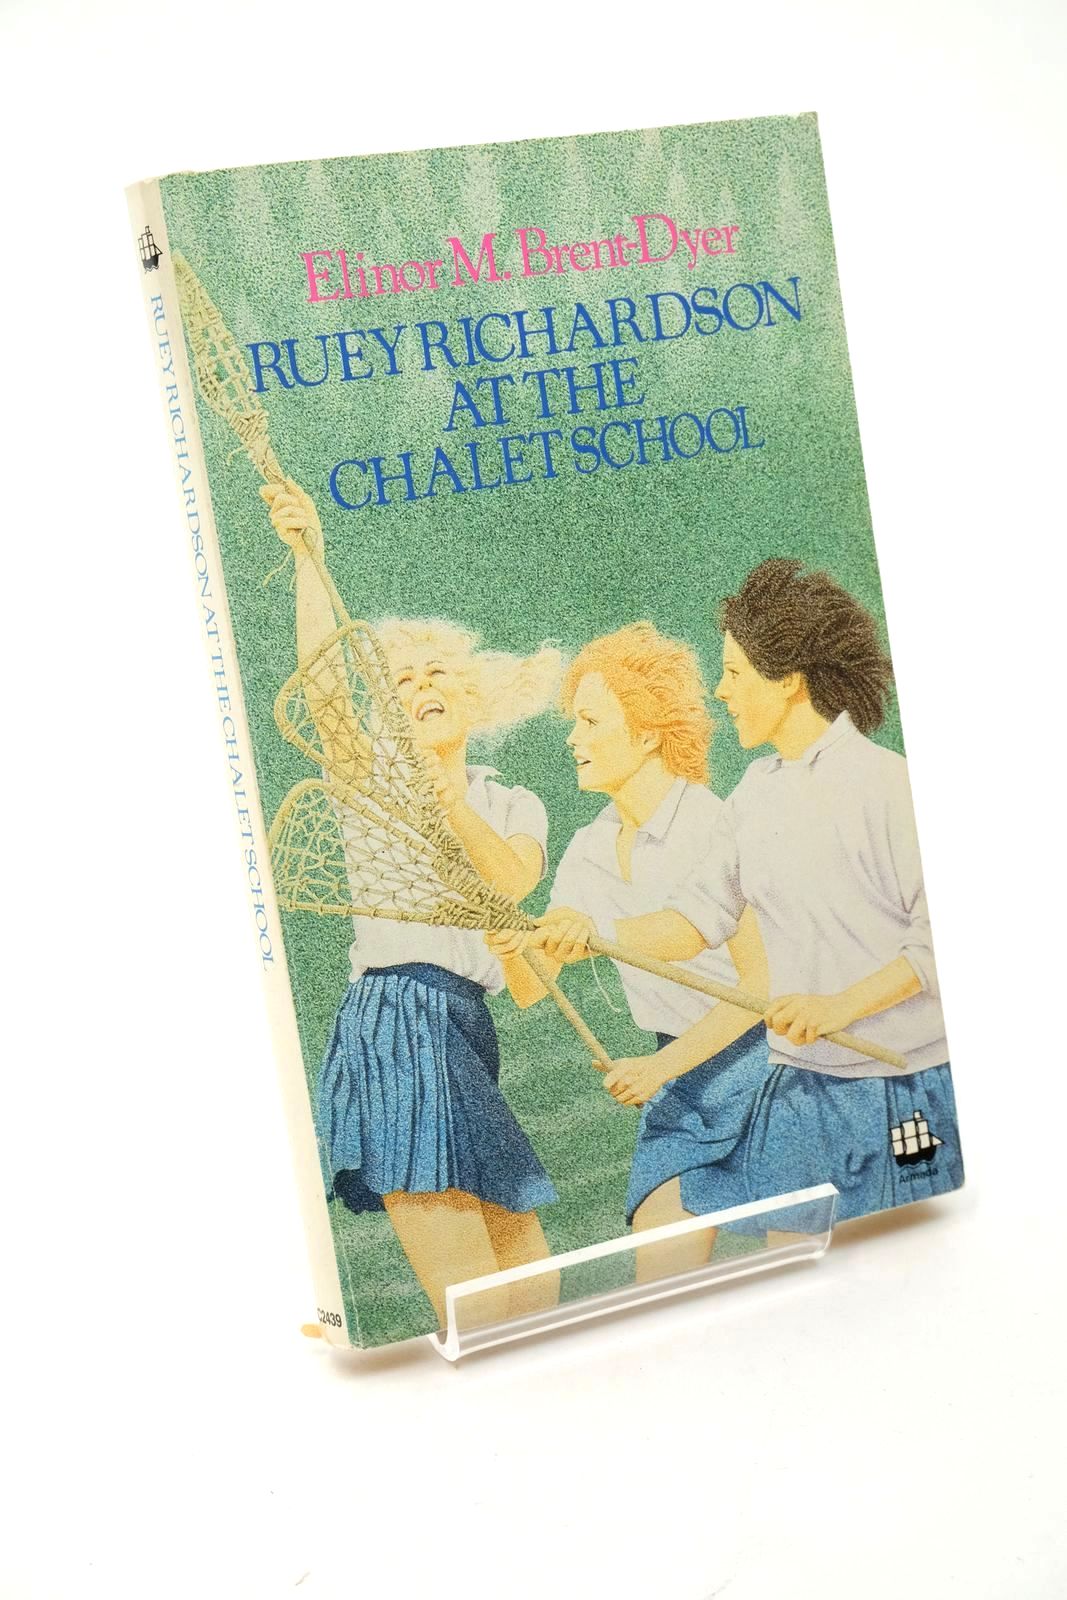 Photo of RUEY RICHARDSON AT THE CHALET SCHOOL written by Brent-Dyer, Elinor M. published by Armada (STOCK CODE: 1322575)  for sale by Stella & Rose's Books